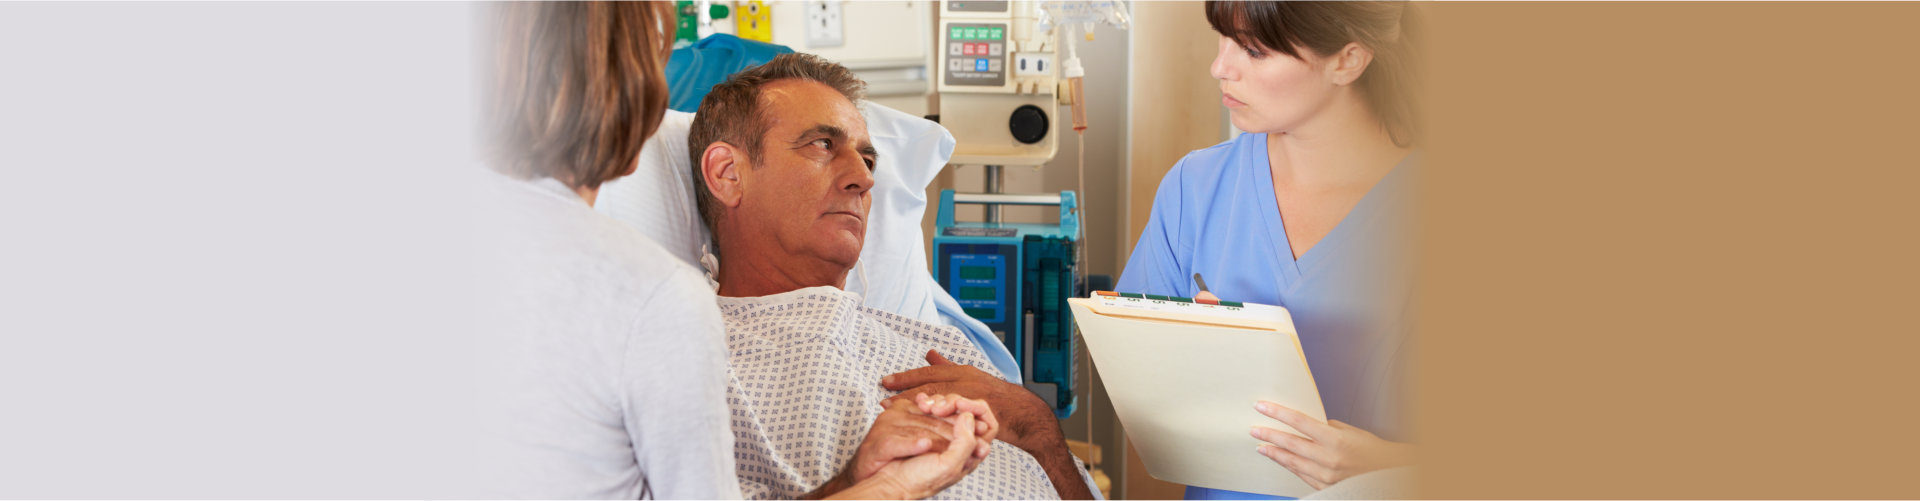 nurse giving details to patient on bed